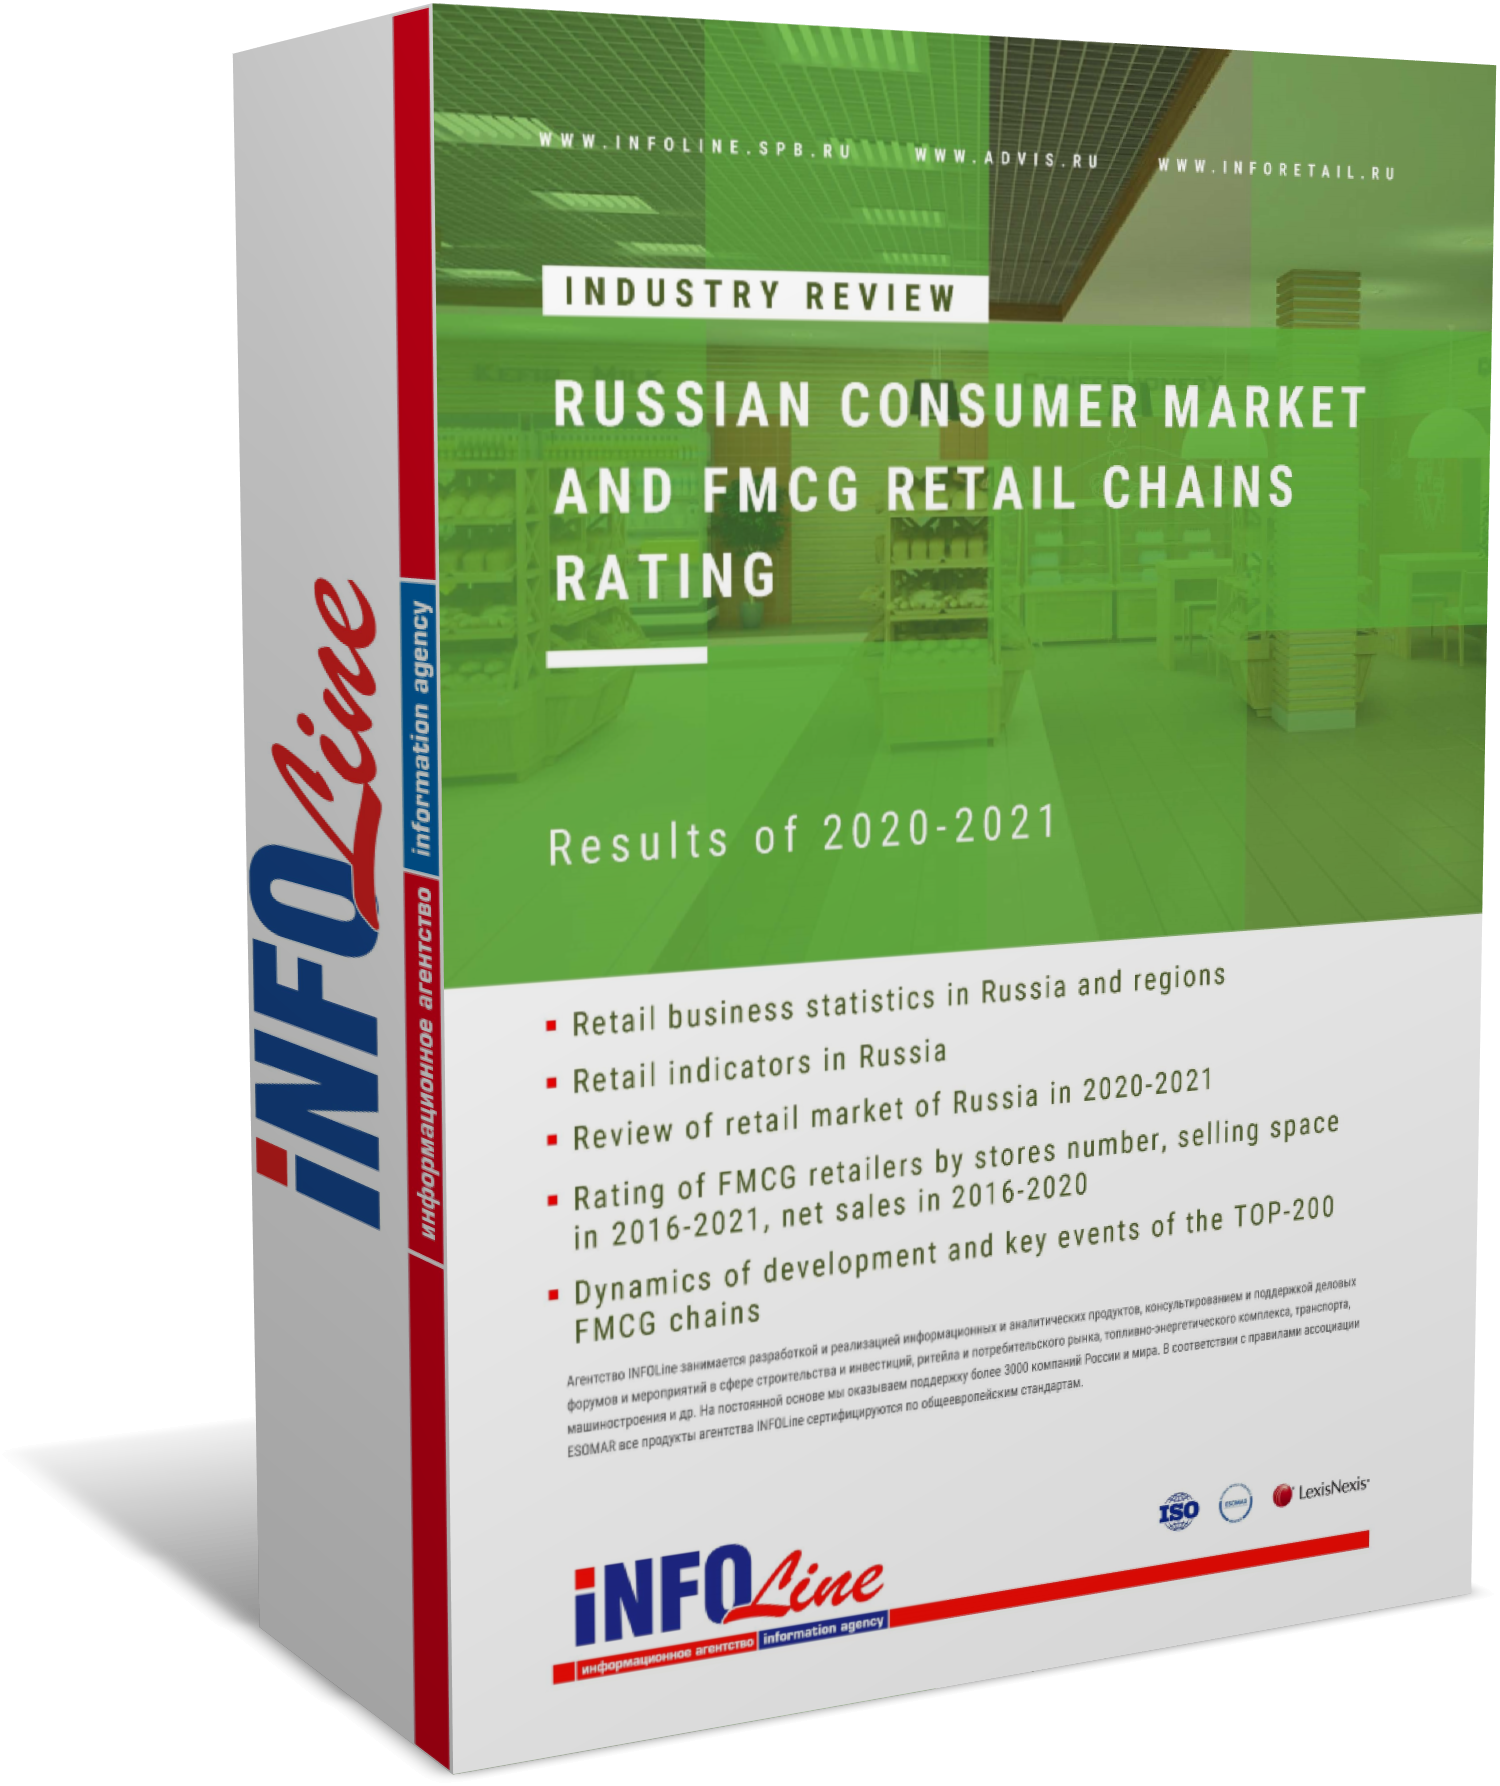 Research "Russian consumer market and FMCG retail chains rating: Results of 2020-2021"